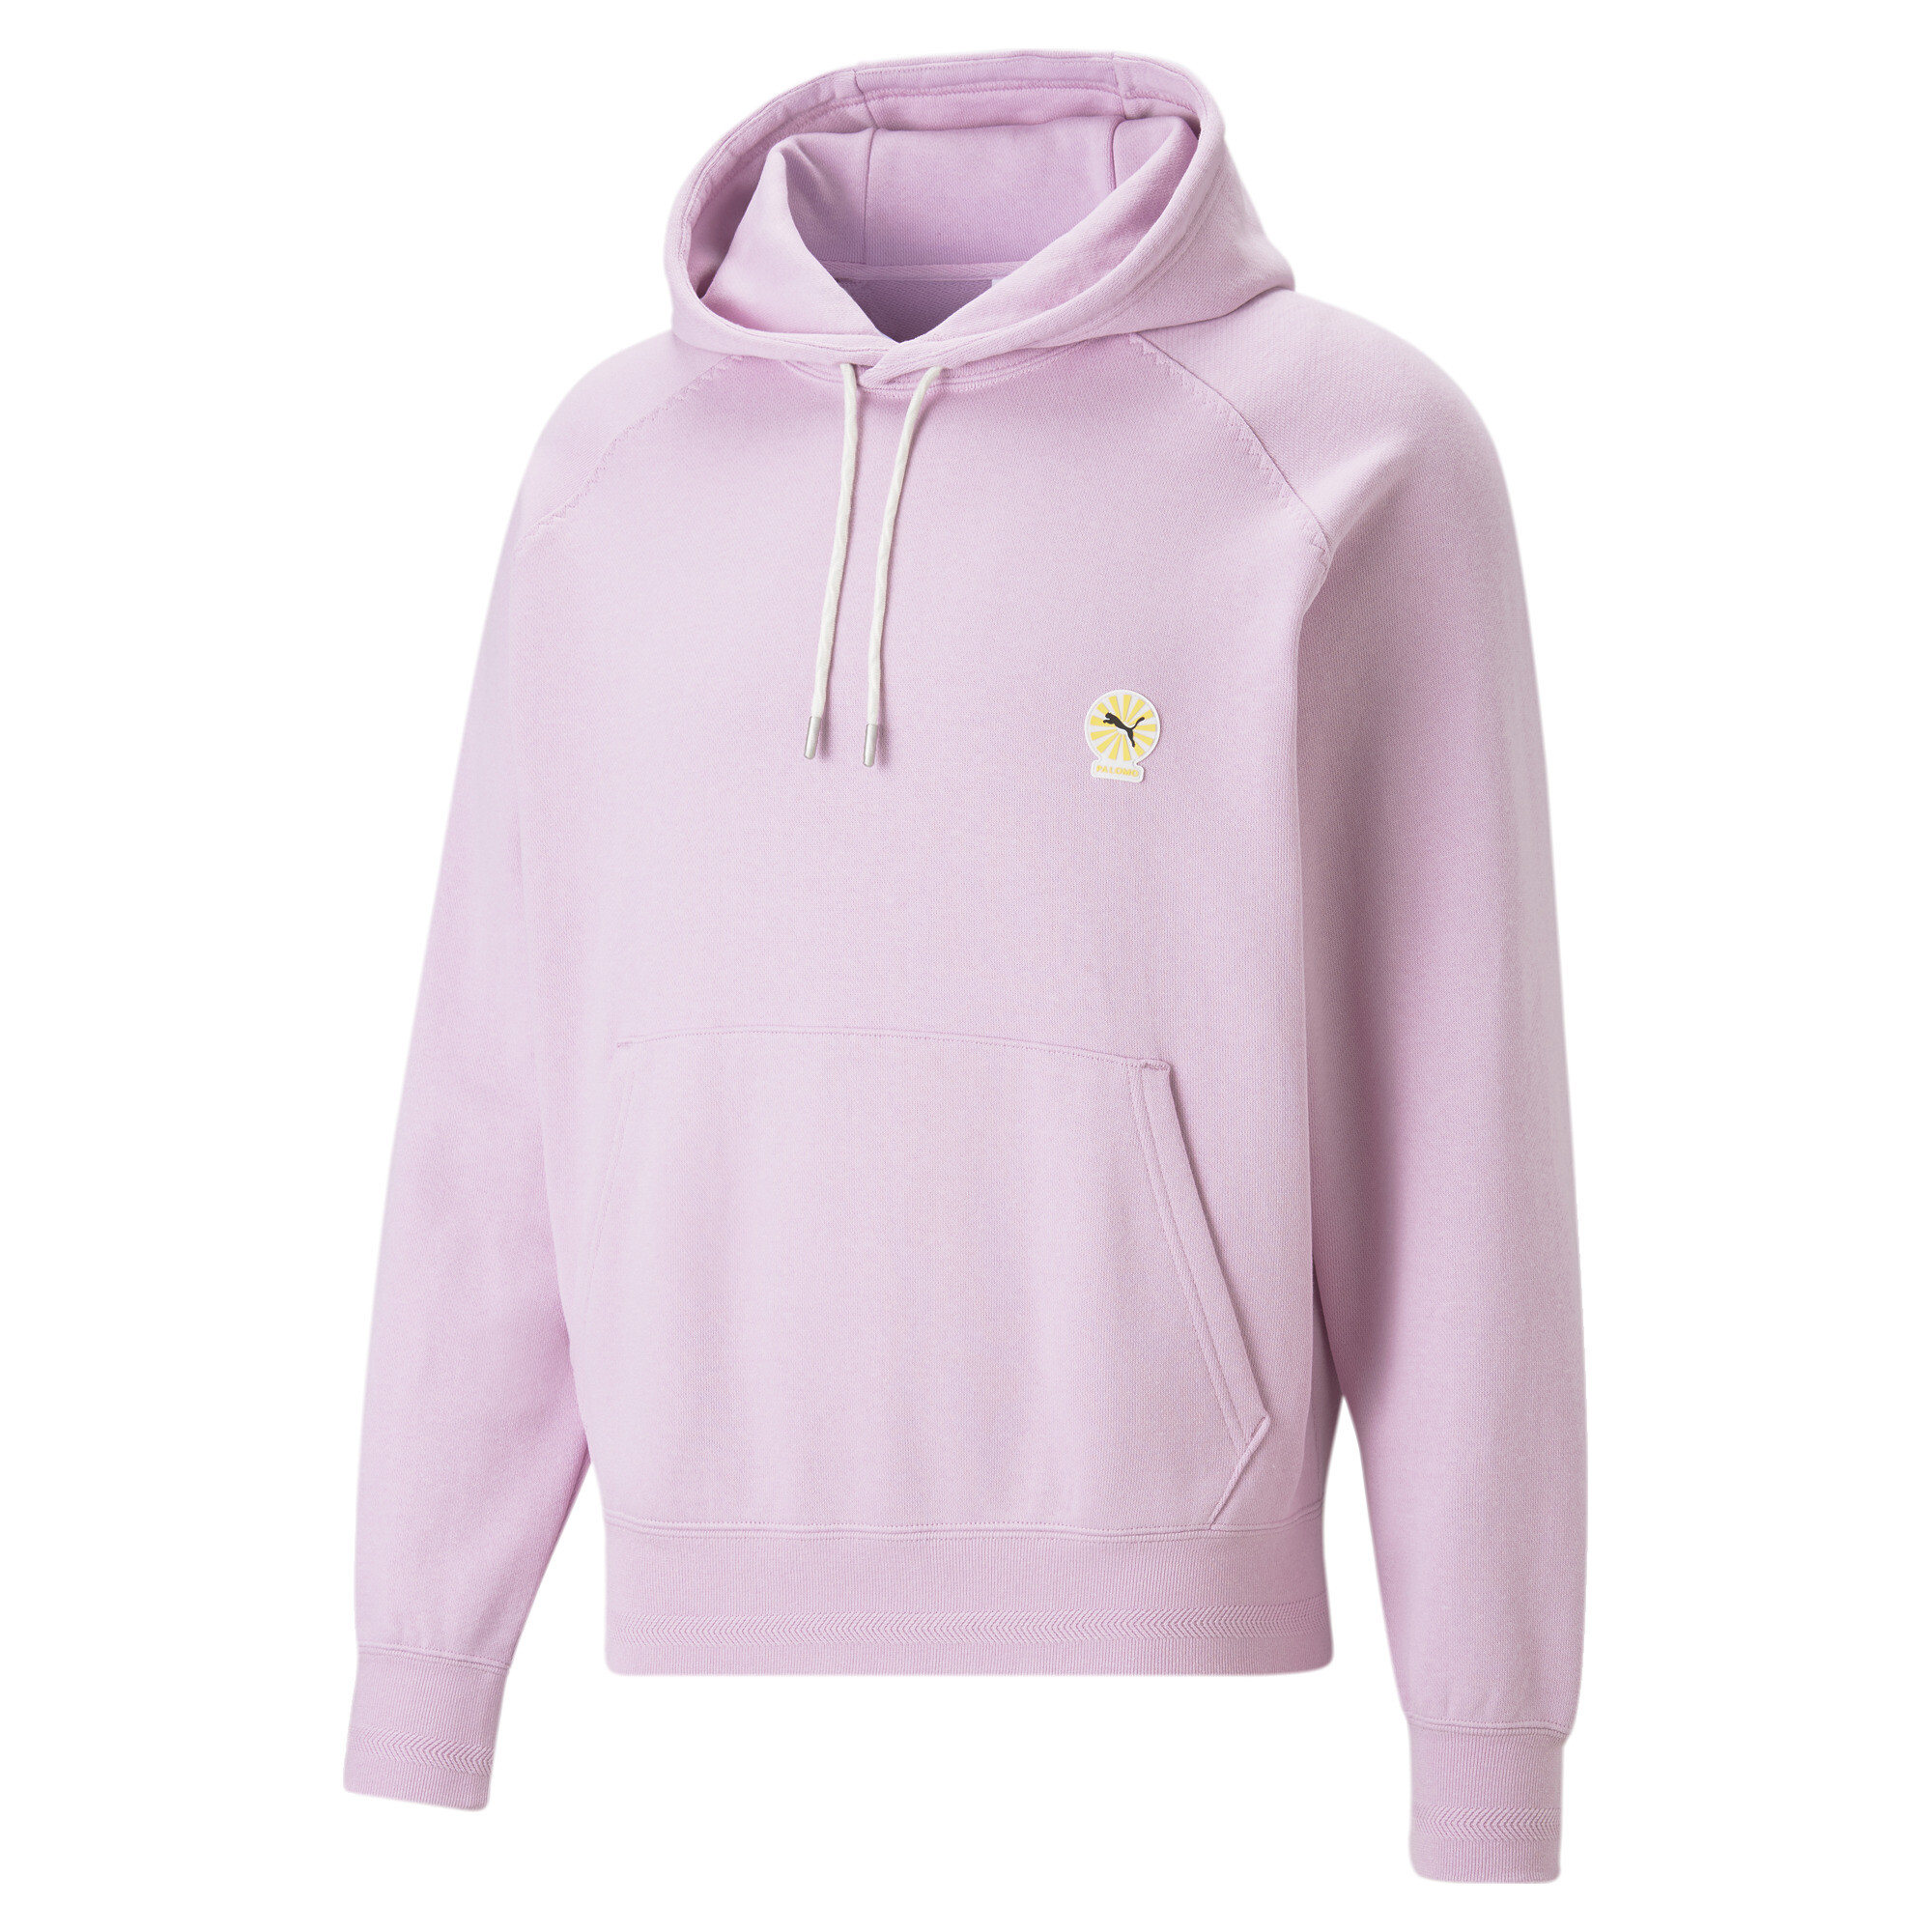 Men's PUMA X PALOMO Hoodie In 70 - Pink, Size Small